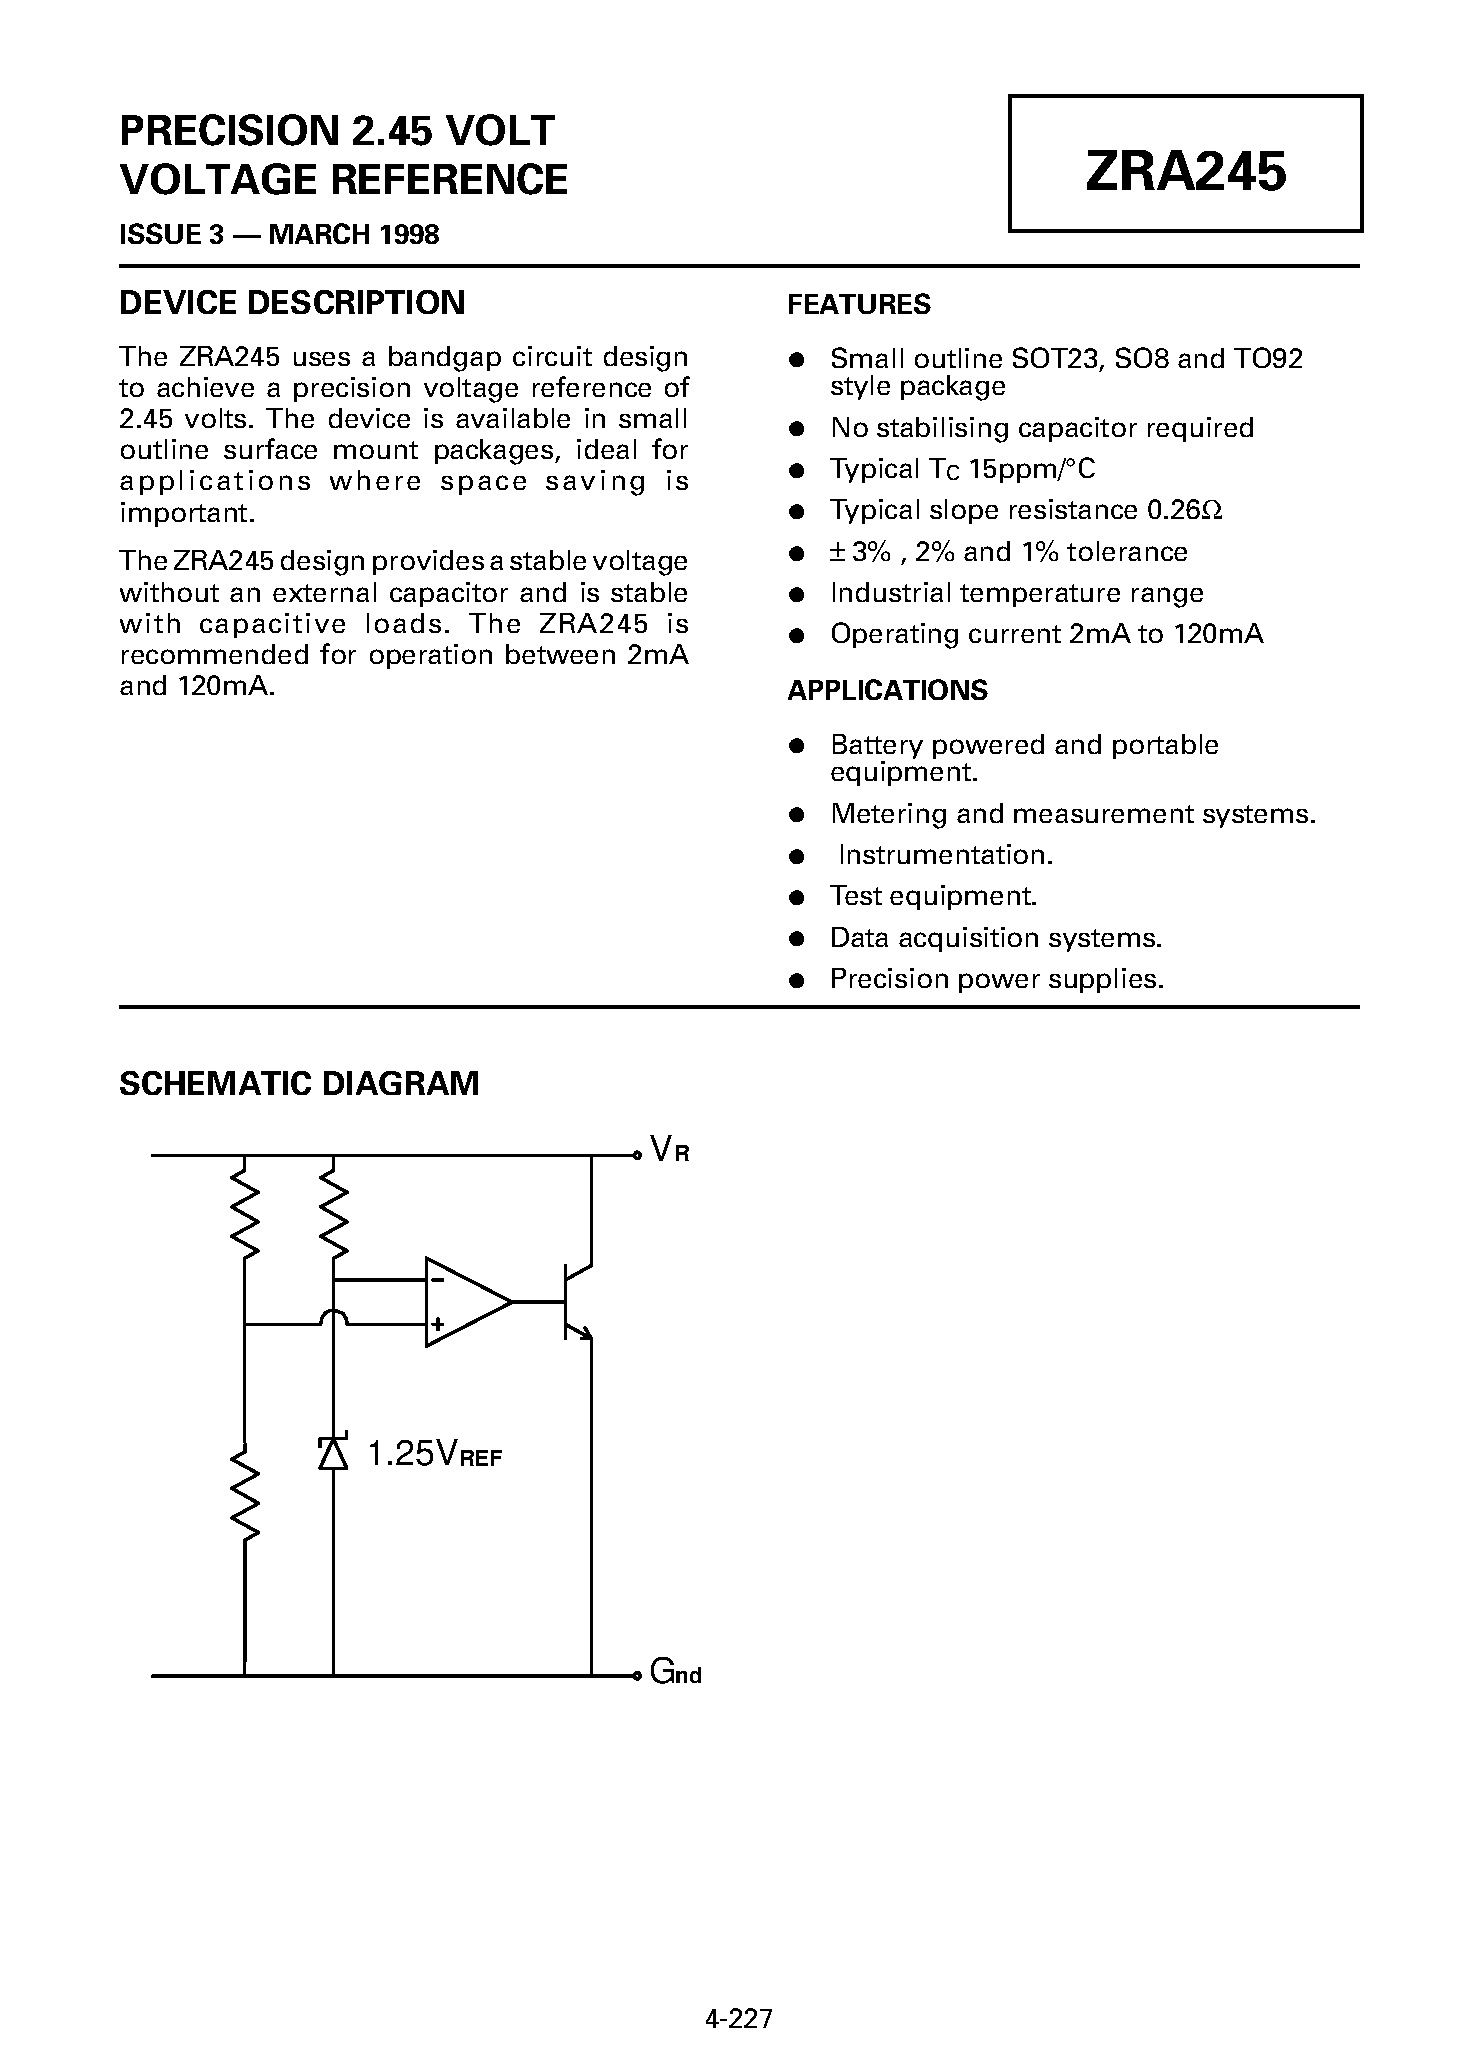 Datasheet ZRA245R03 - PRECISION 2.45 VOLT VOLTAGE REFERENCE page 1